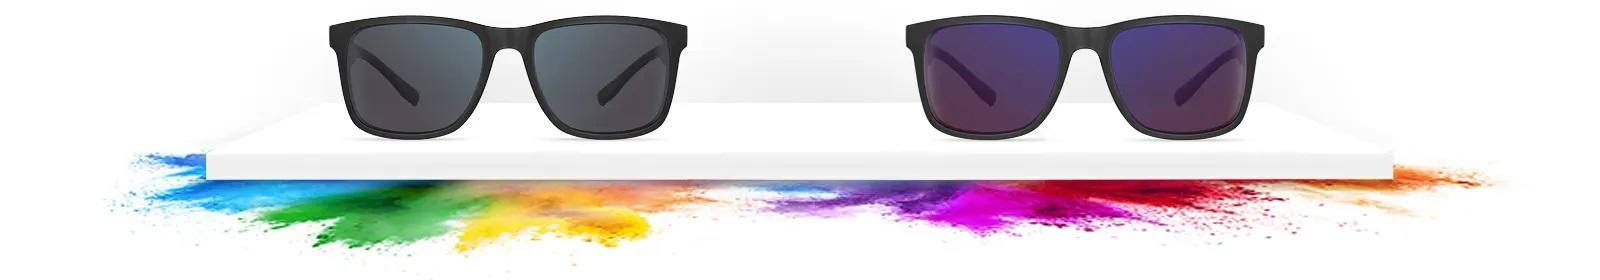 image of two pairs of EnChroma glasses the pair on the left have a colour splash of blue, green, yellow and orange under them, the pair on the right have a colour splash of purple, pink, red and orange under them